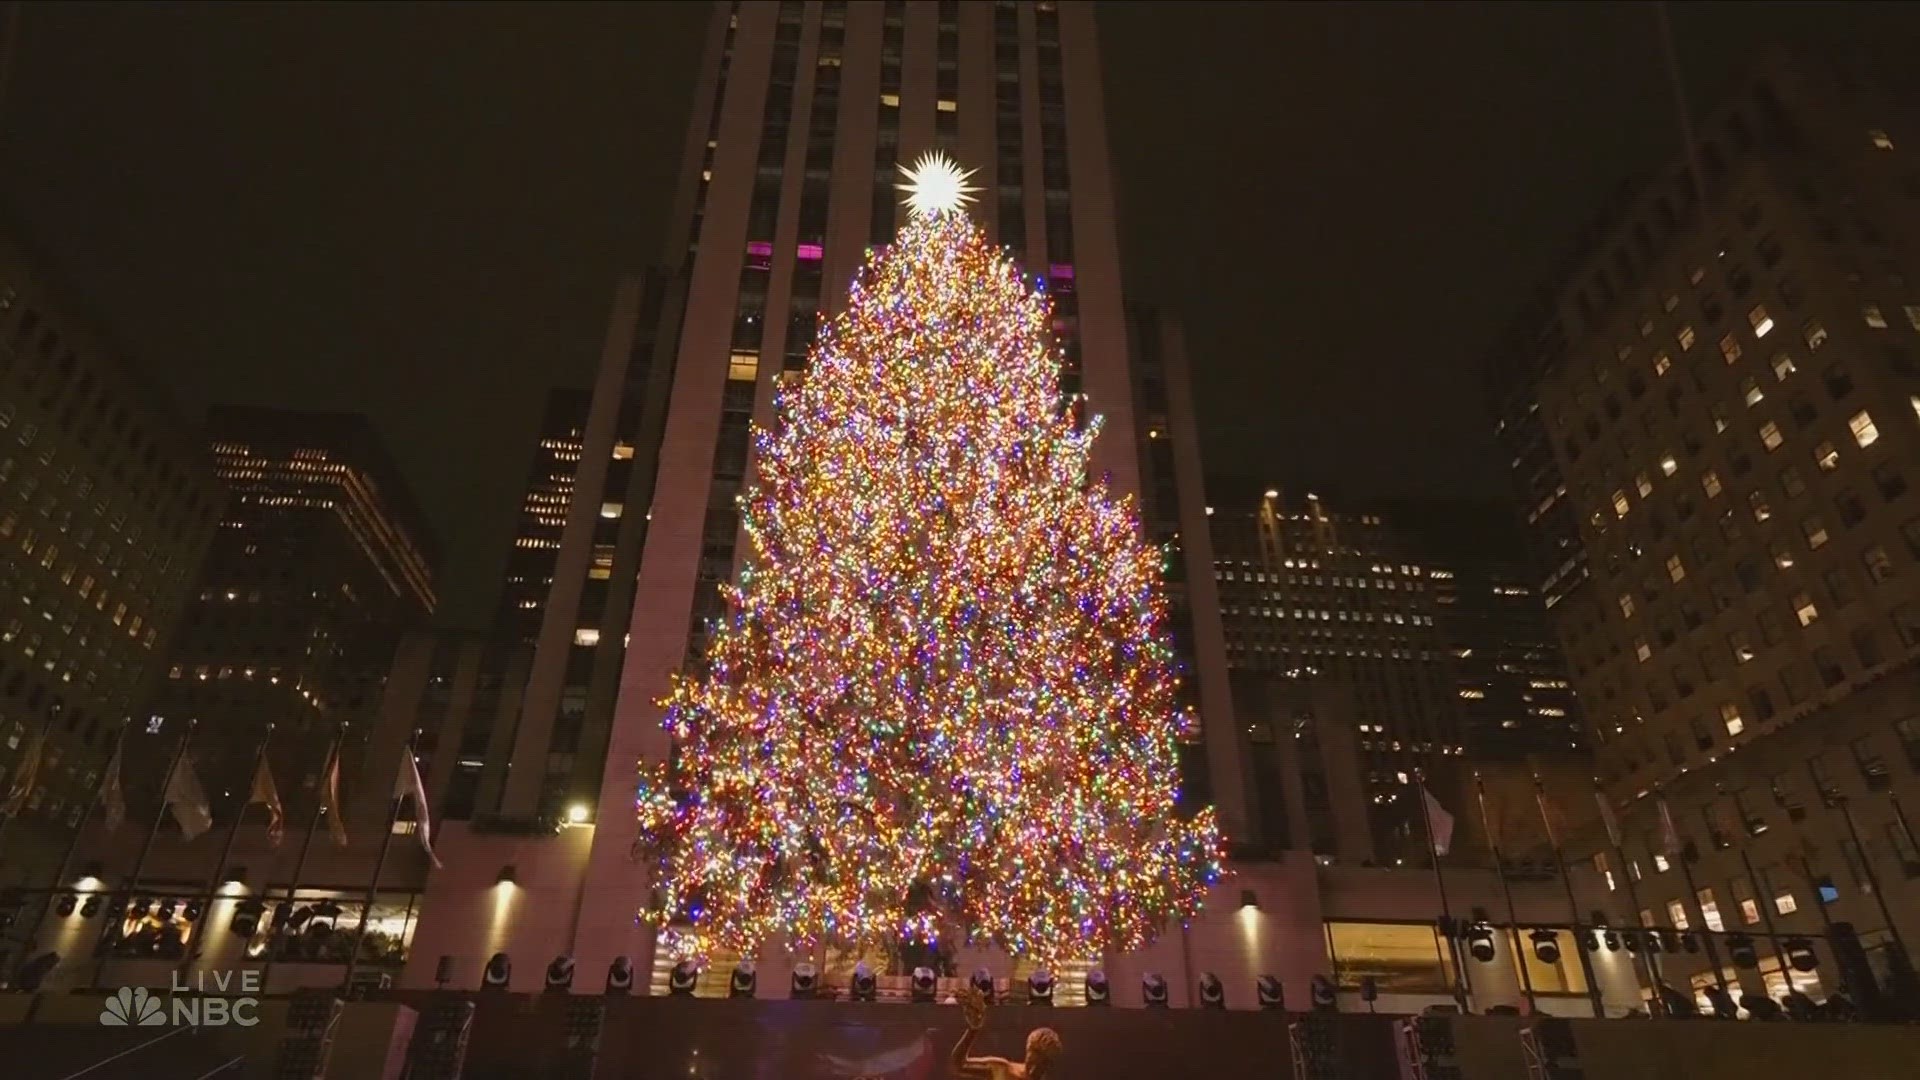 30 Rock tree lit up for holiday season